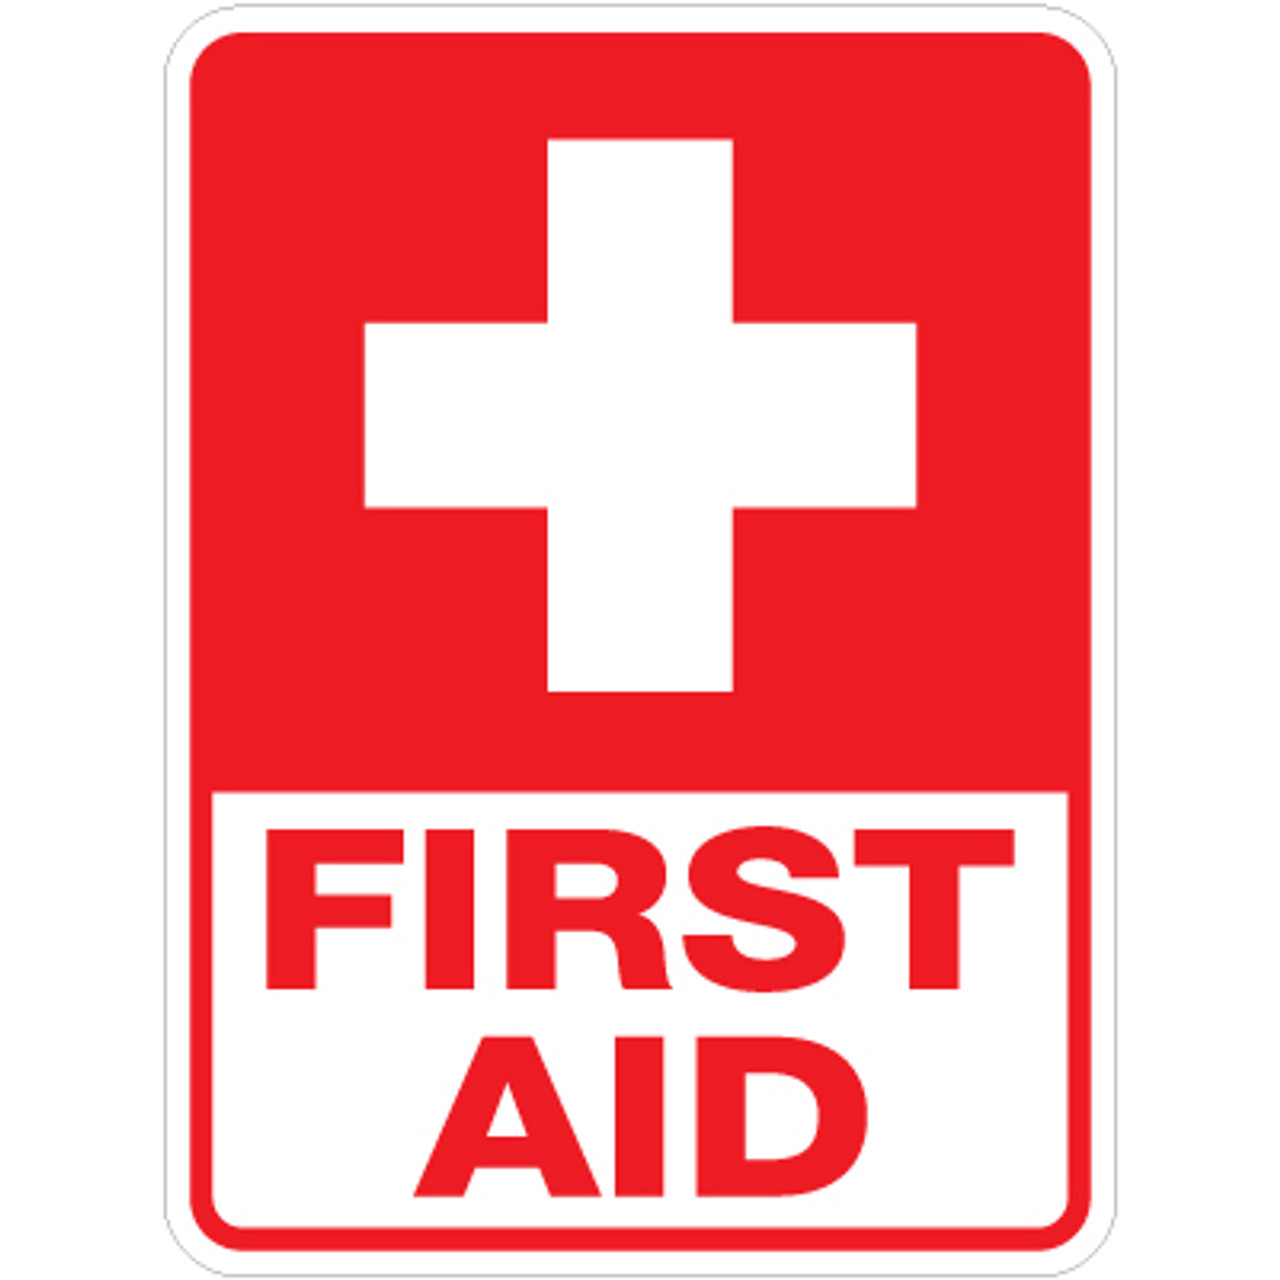 Printable First Aid Sign